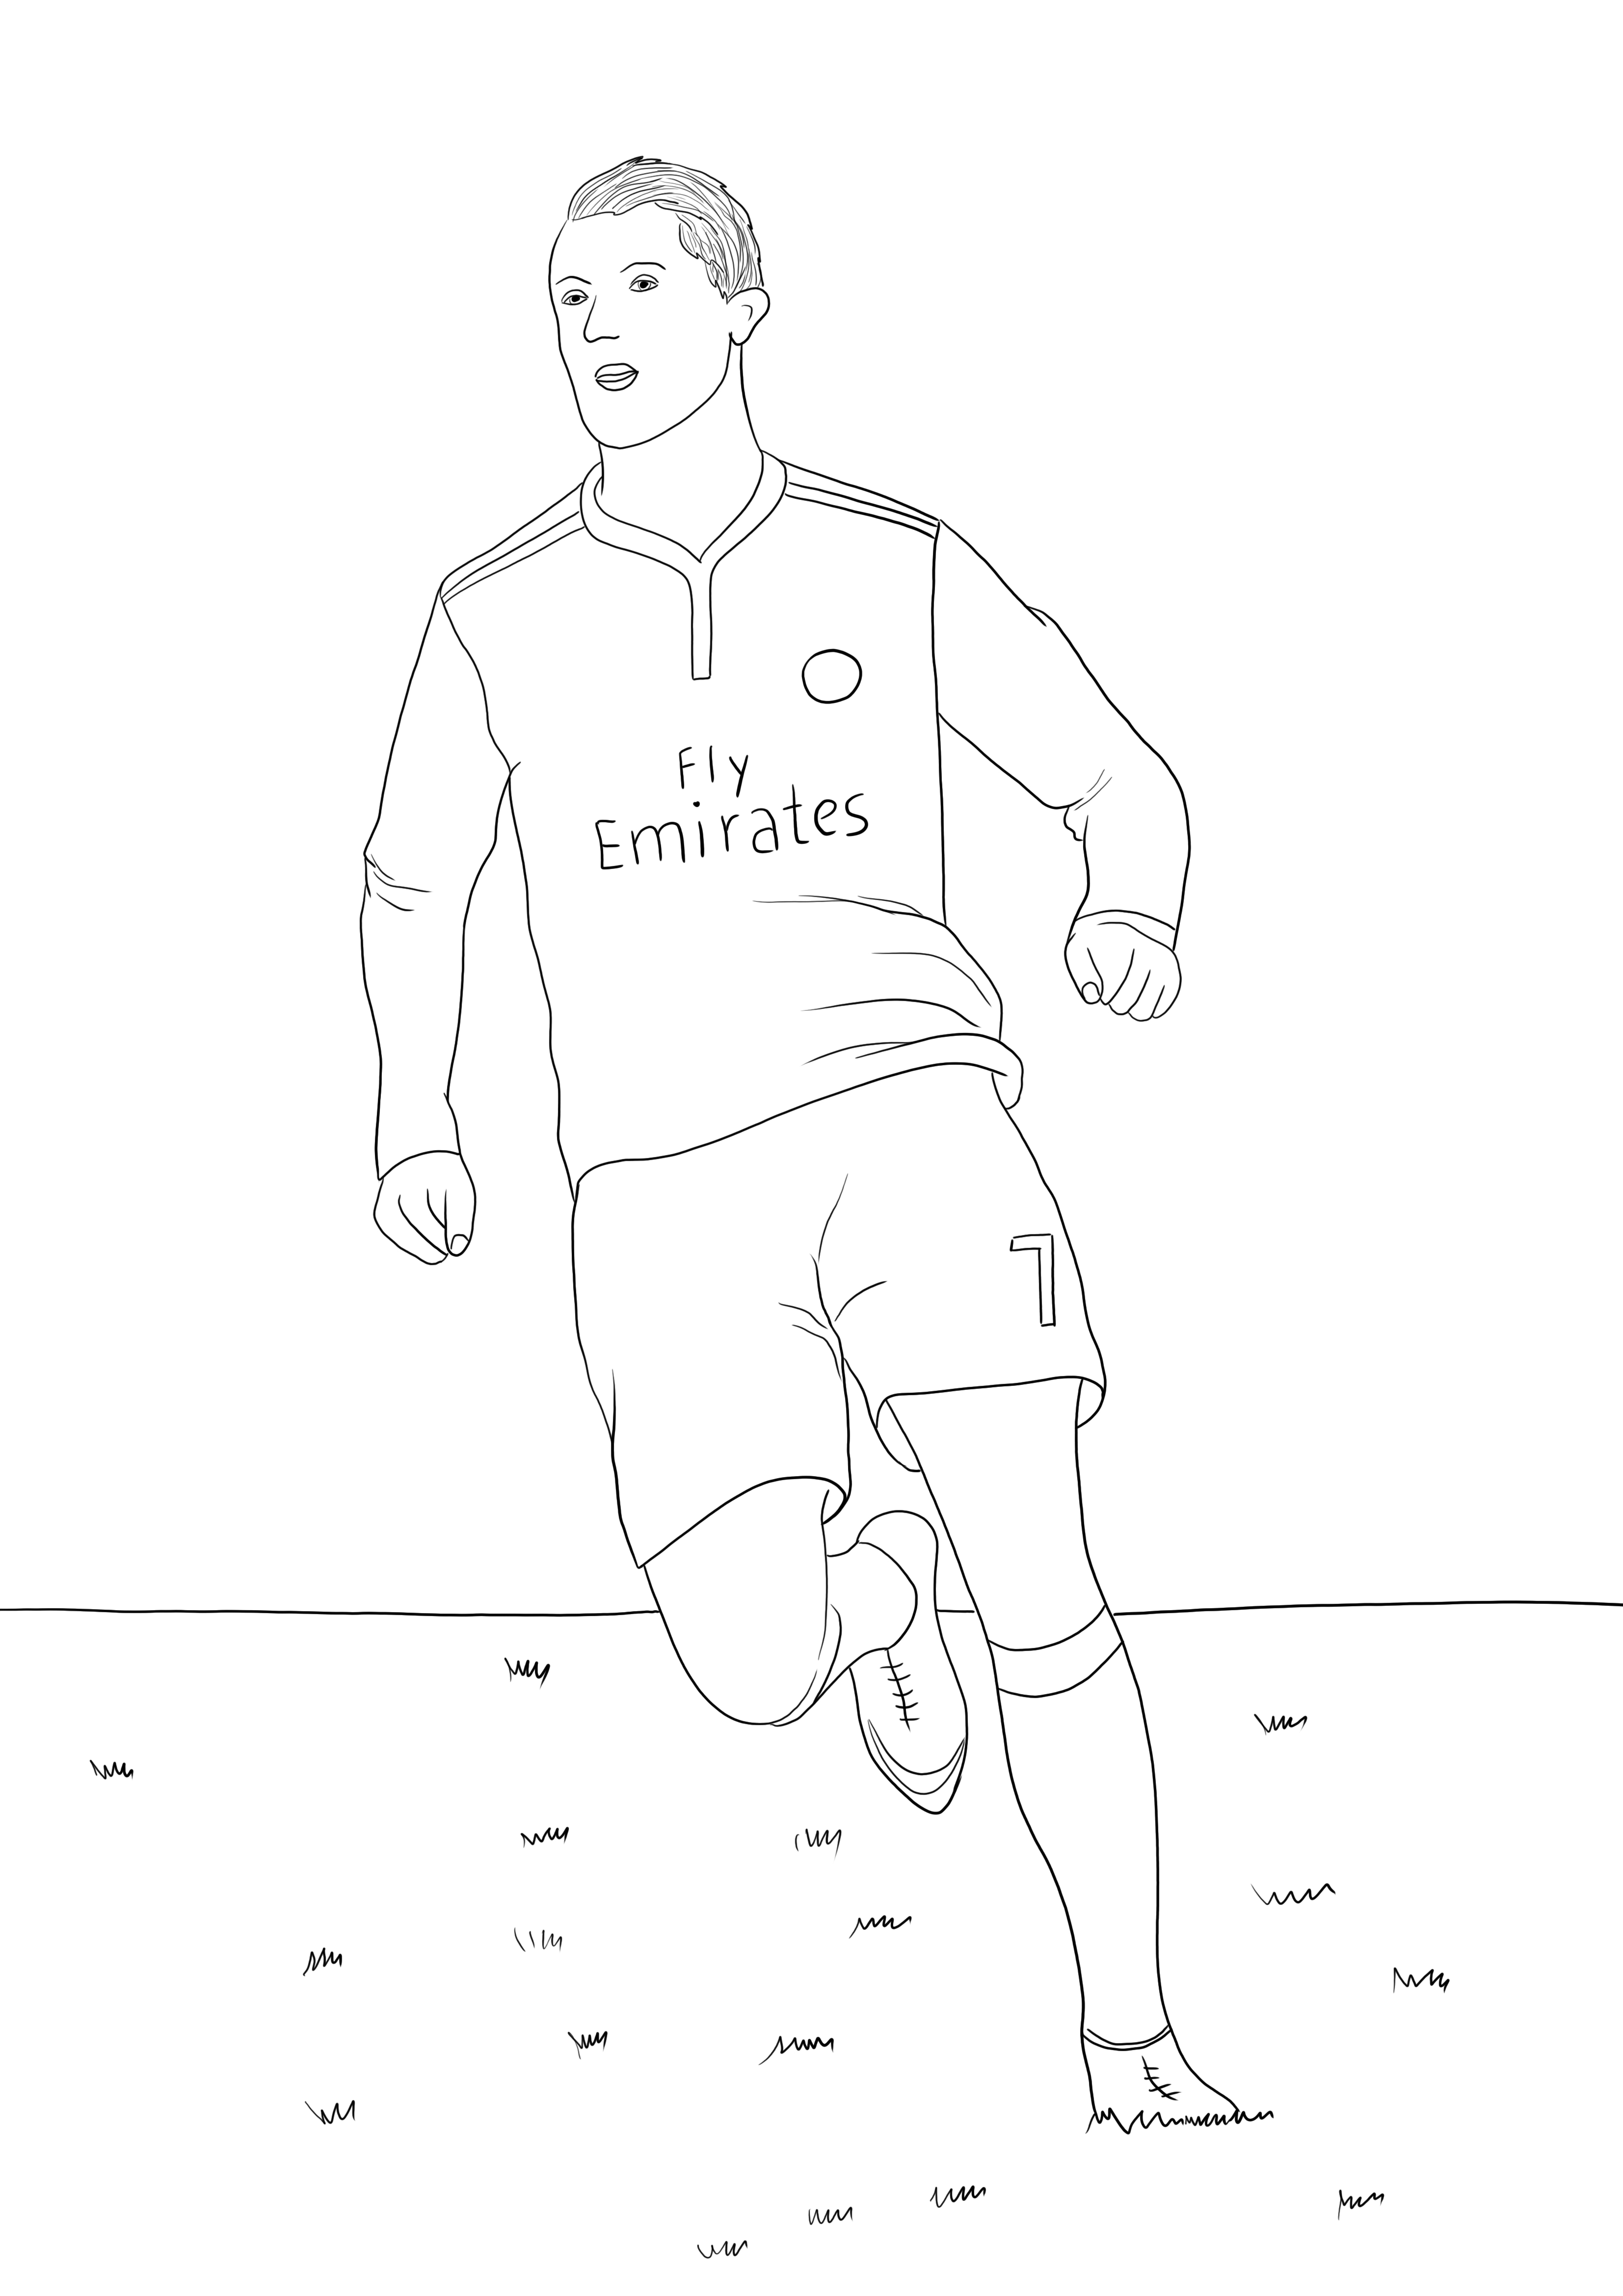 Cristiano Ronaldo Image 6 Coloring Pages Soccer Players Coloring ...